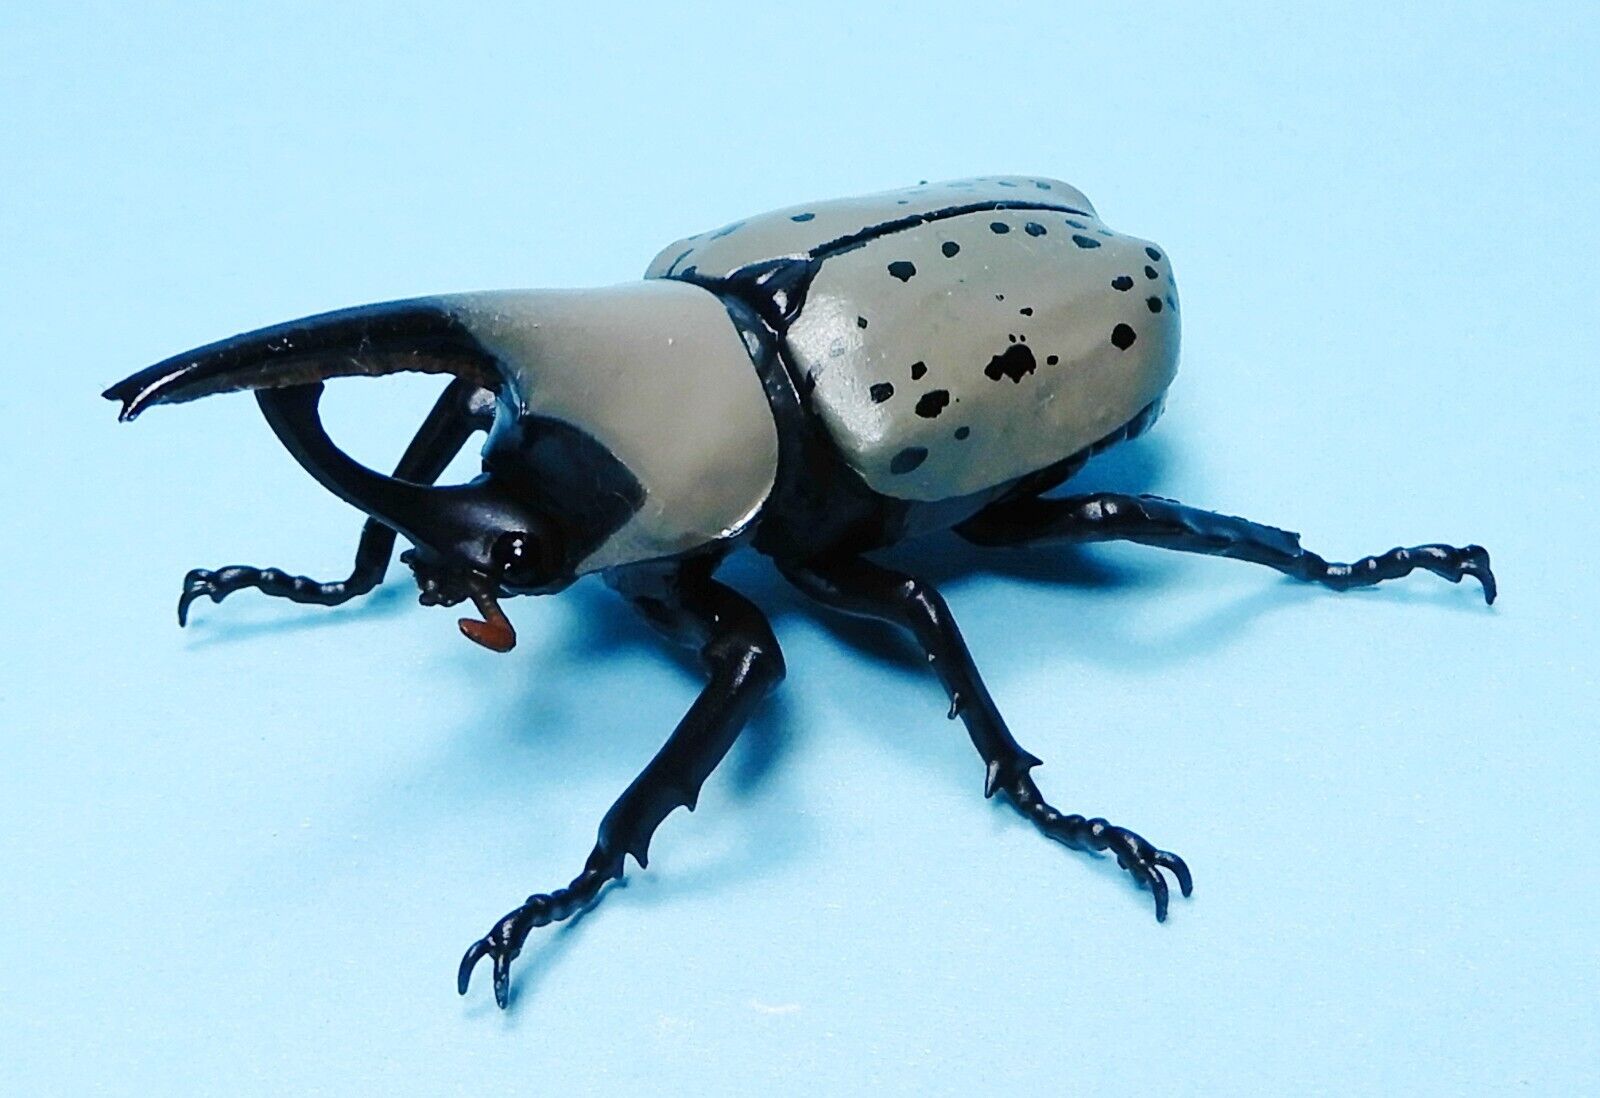 Bandai The Diversity of Life on Earth Insect 3 Hercules beetle white US seller